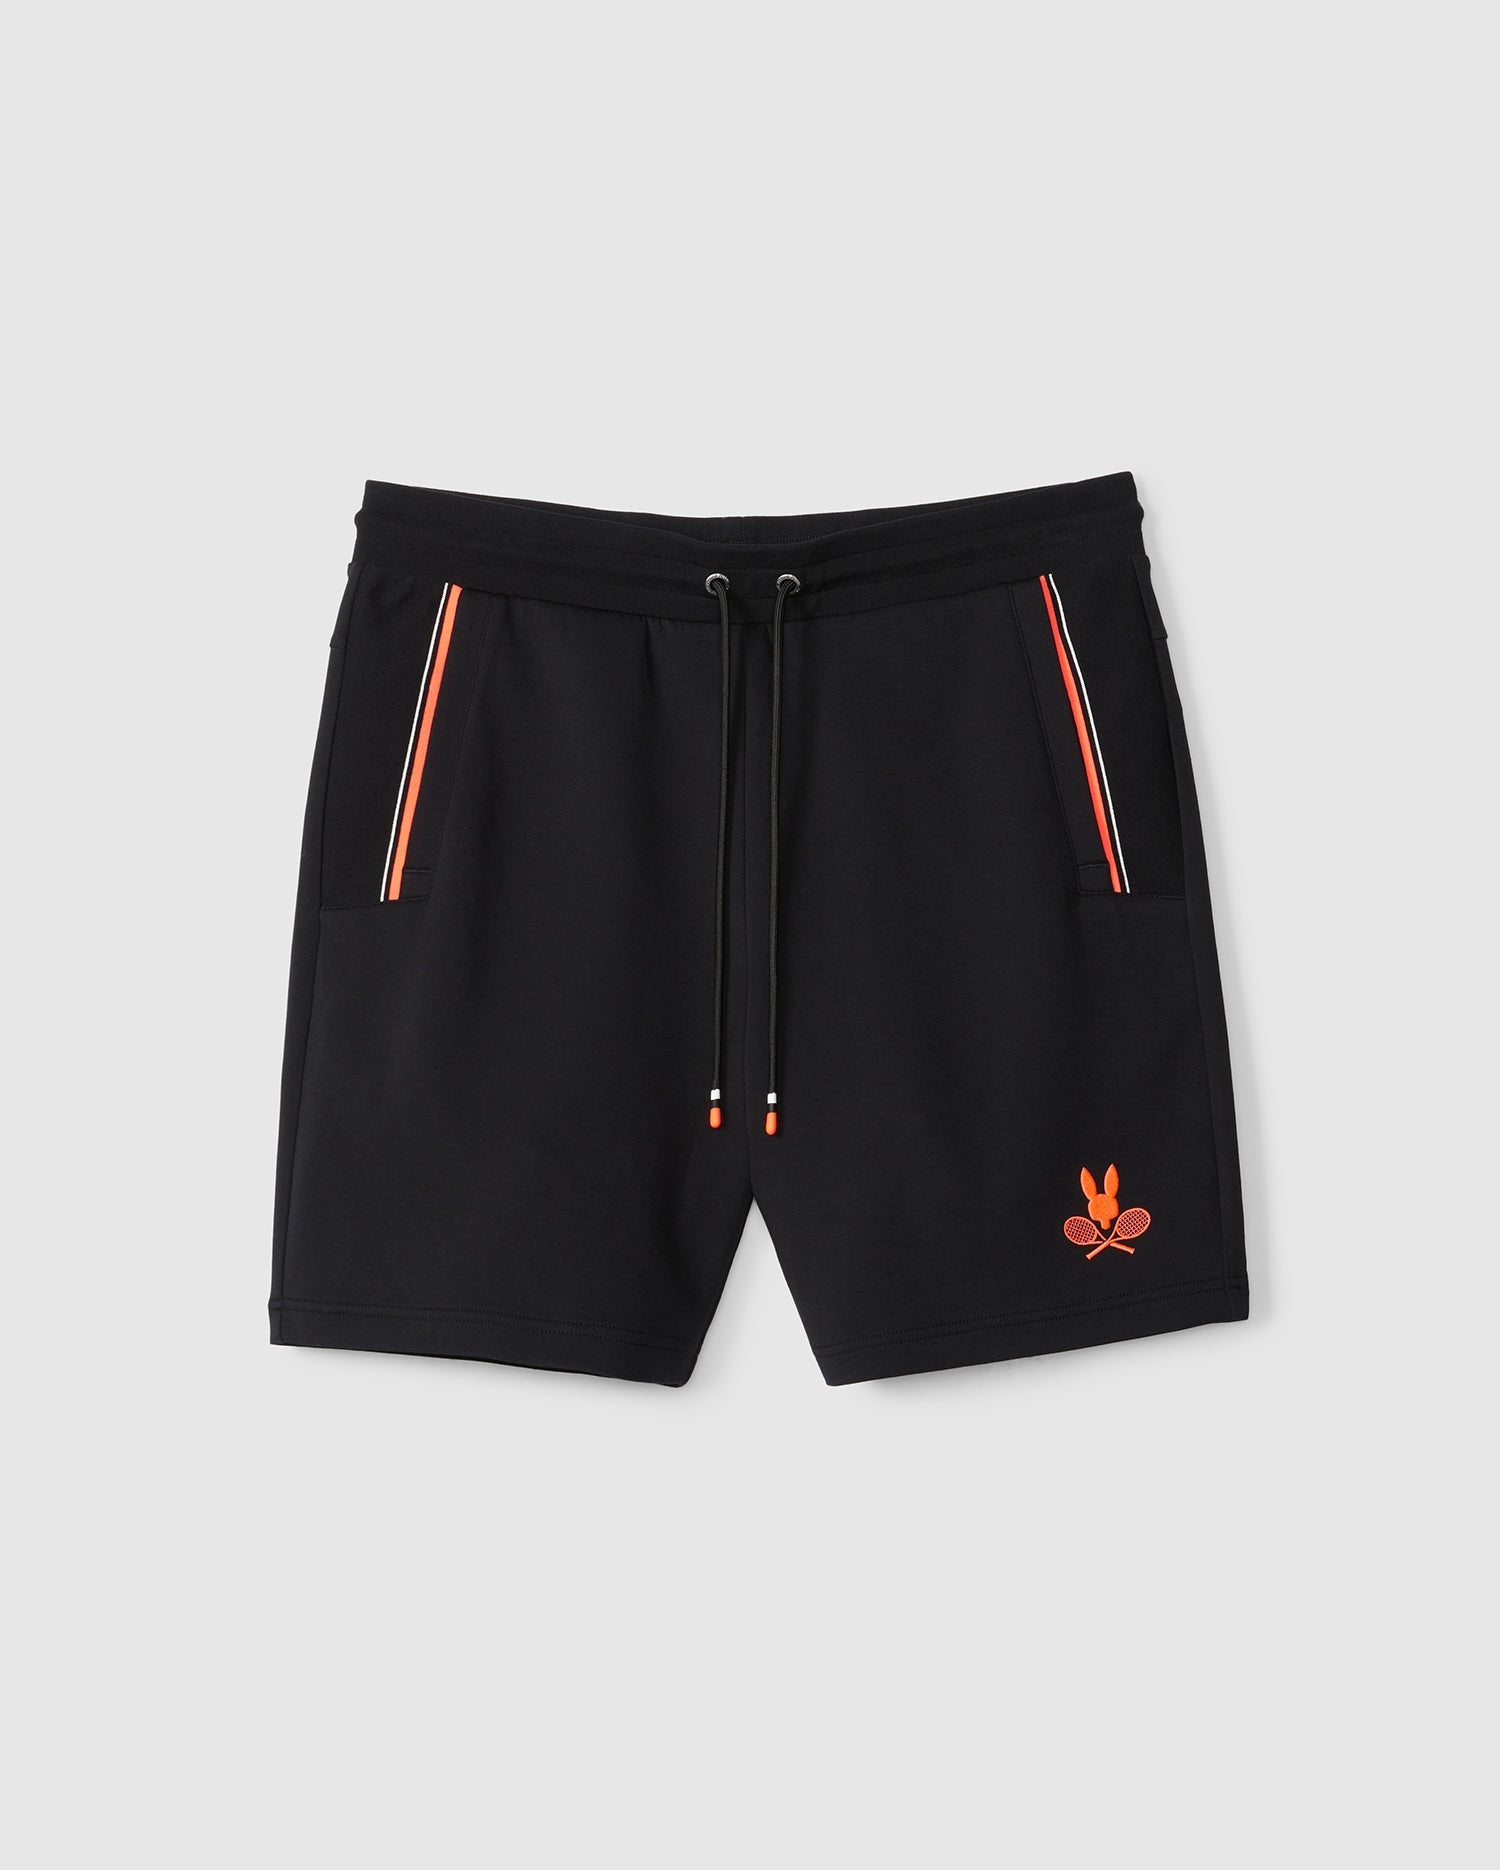 A pair of Psycho Bunny MENS COURTSIDE TRACK SHORT - B6R690C200 in black with red and orange accents. Made from a stretch cotton-blend fabric, they feature a drawstring waist, two side pockets with striped details, and a small red emblem on the right leg. The shorts are displayed against a plain white background.